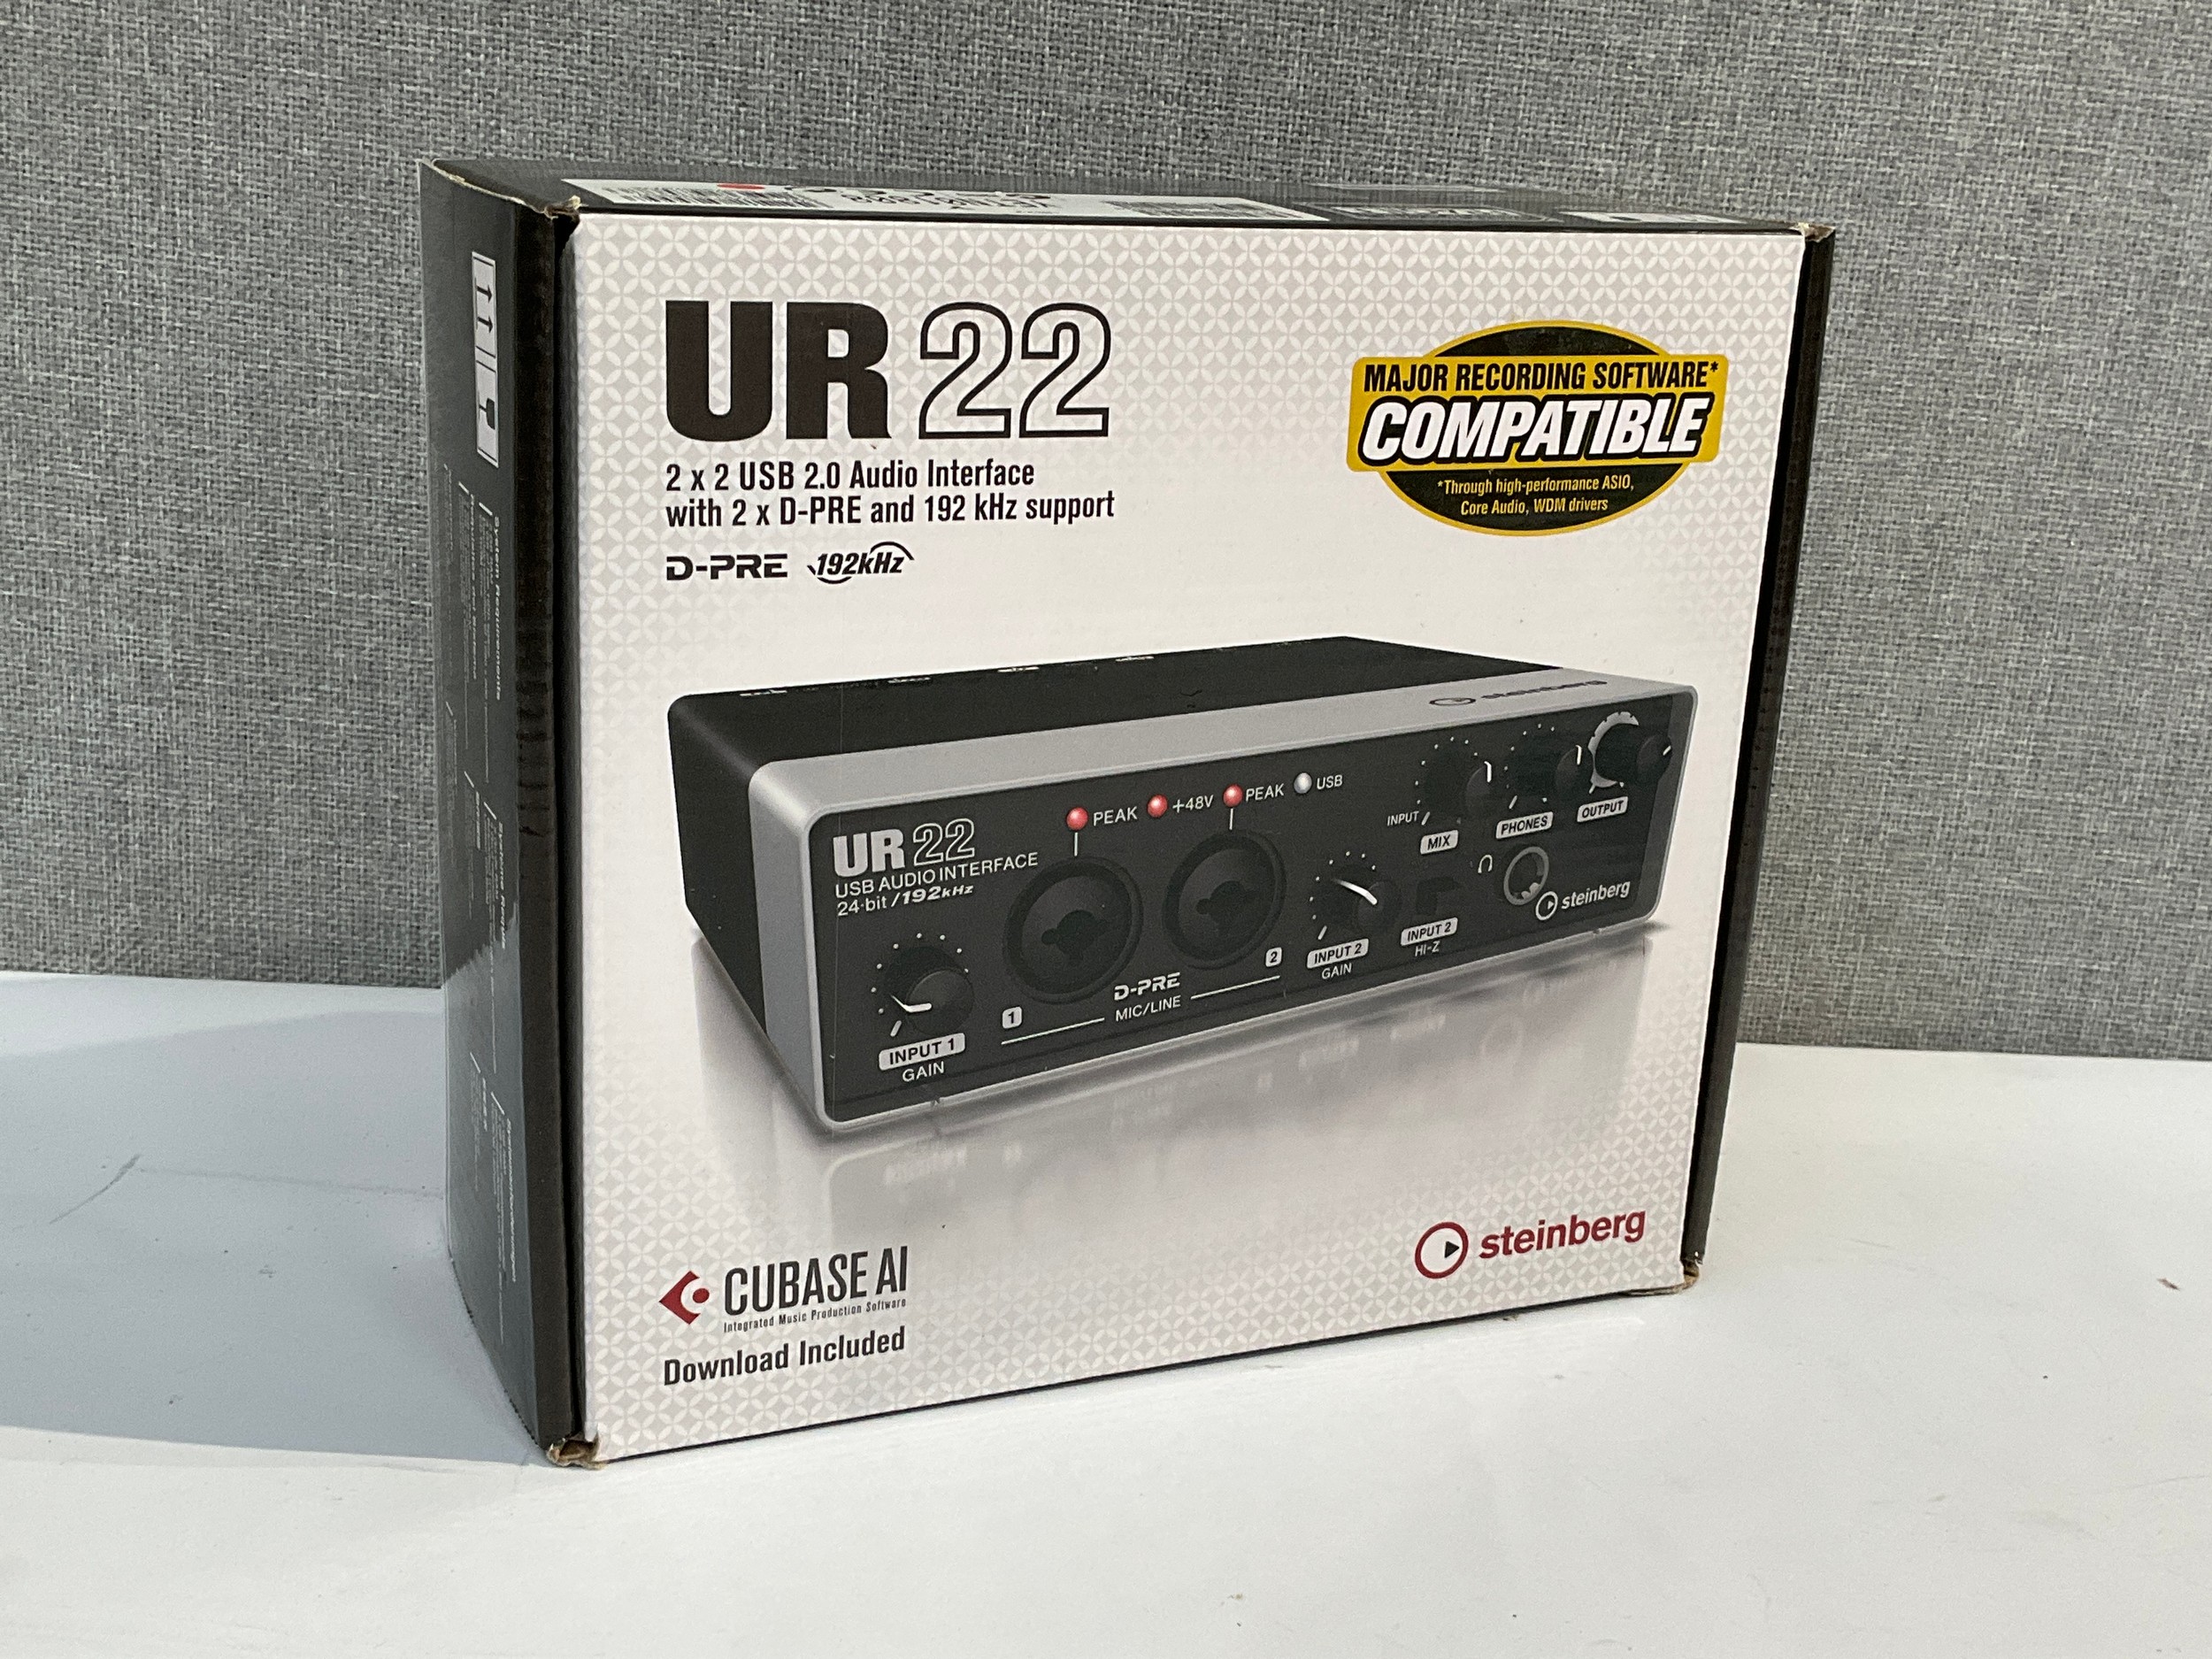 A Steinberg UR22 USB Audio Interface for recording, boxed